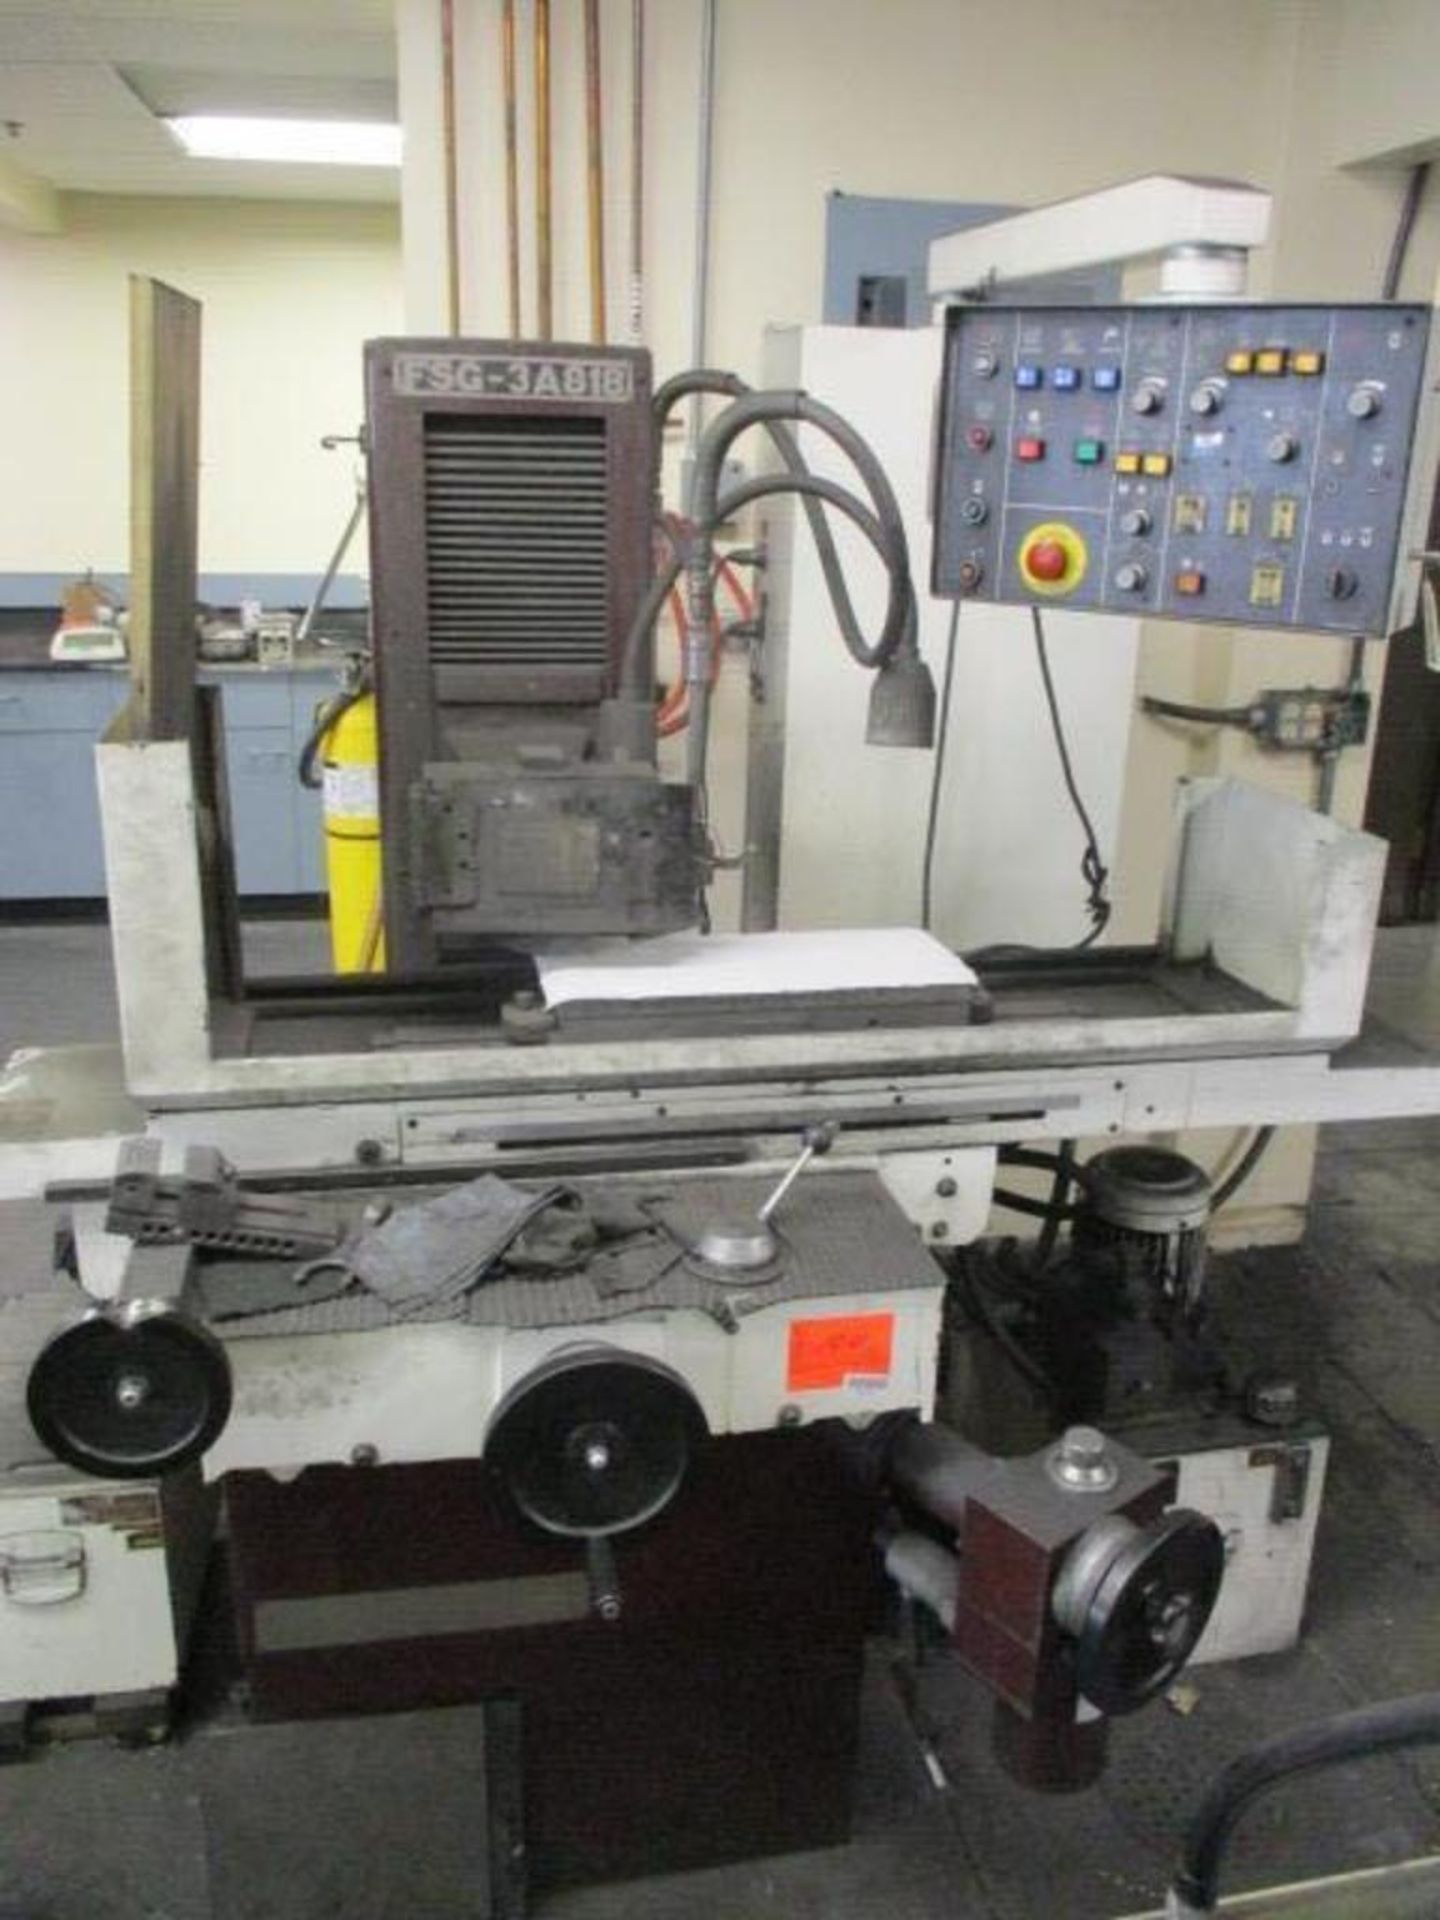 8" x 18" Chevalier FSG-3A818 Surface Grinder 3 Axis Hydraulic - Located In: Huntington Park, CA - - Image 2 of 6